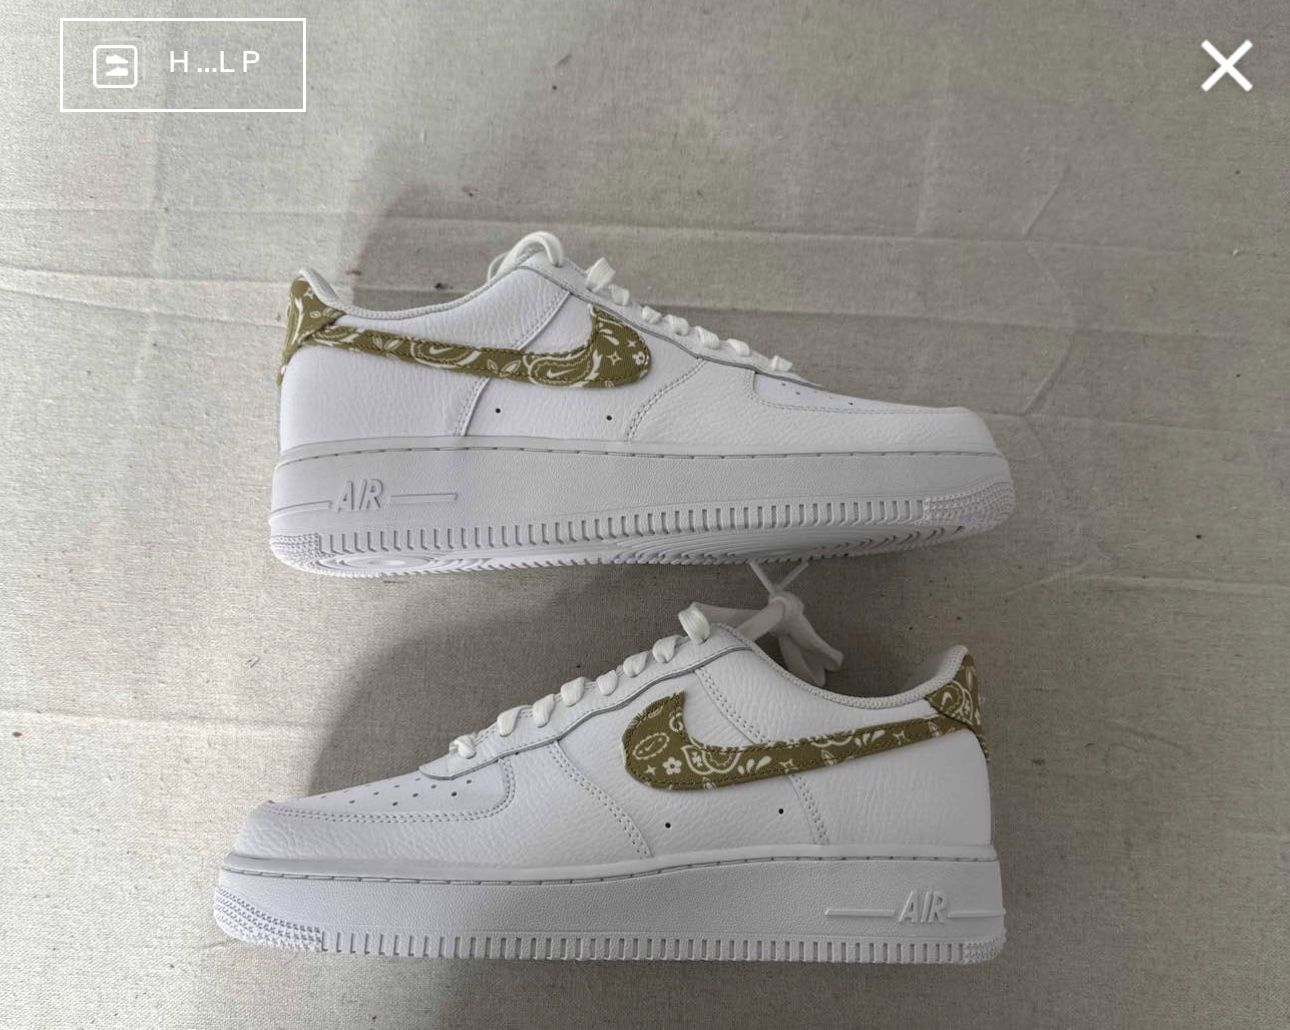 Nike WMNS Air Force 1 '07 Essential Shoes 